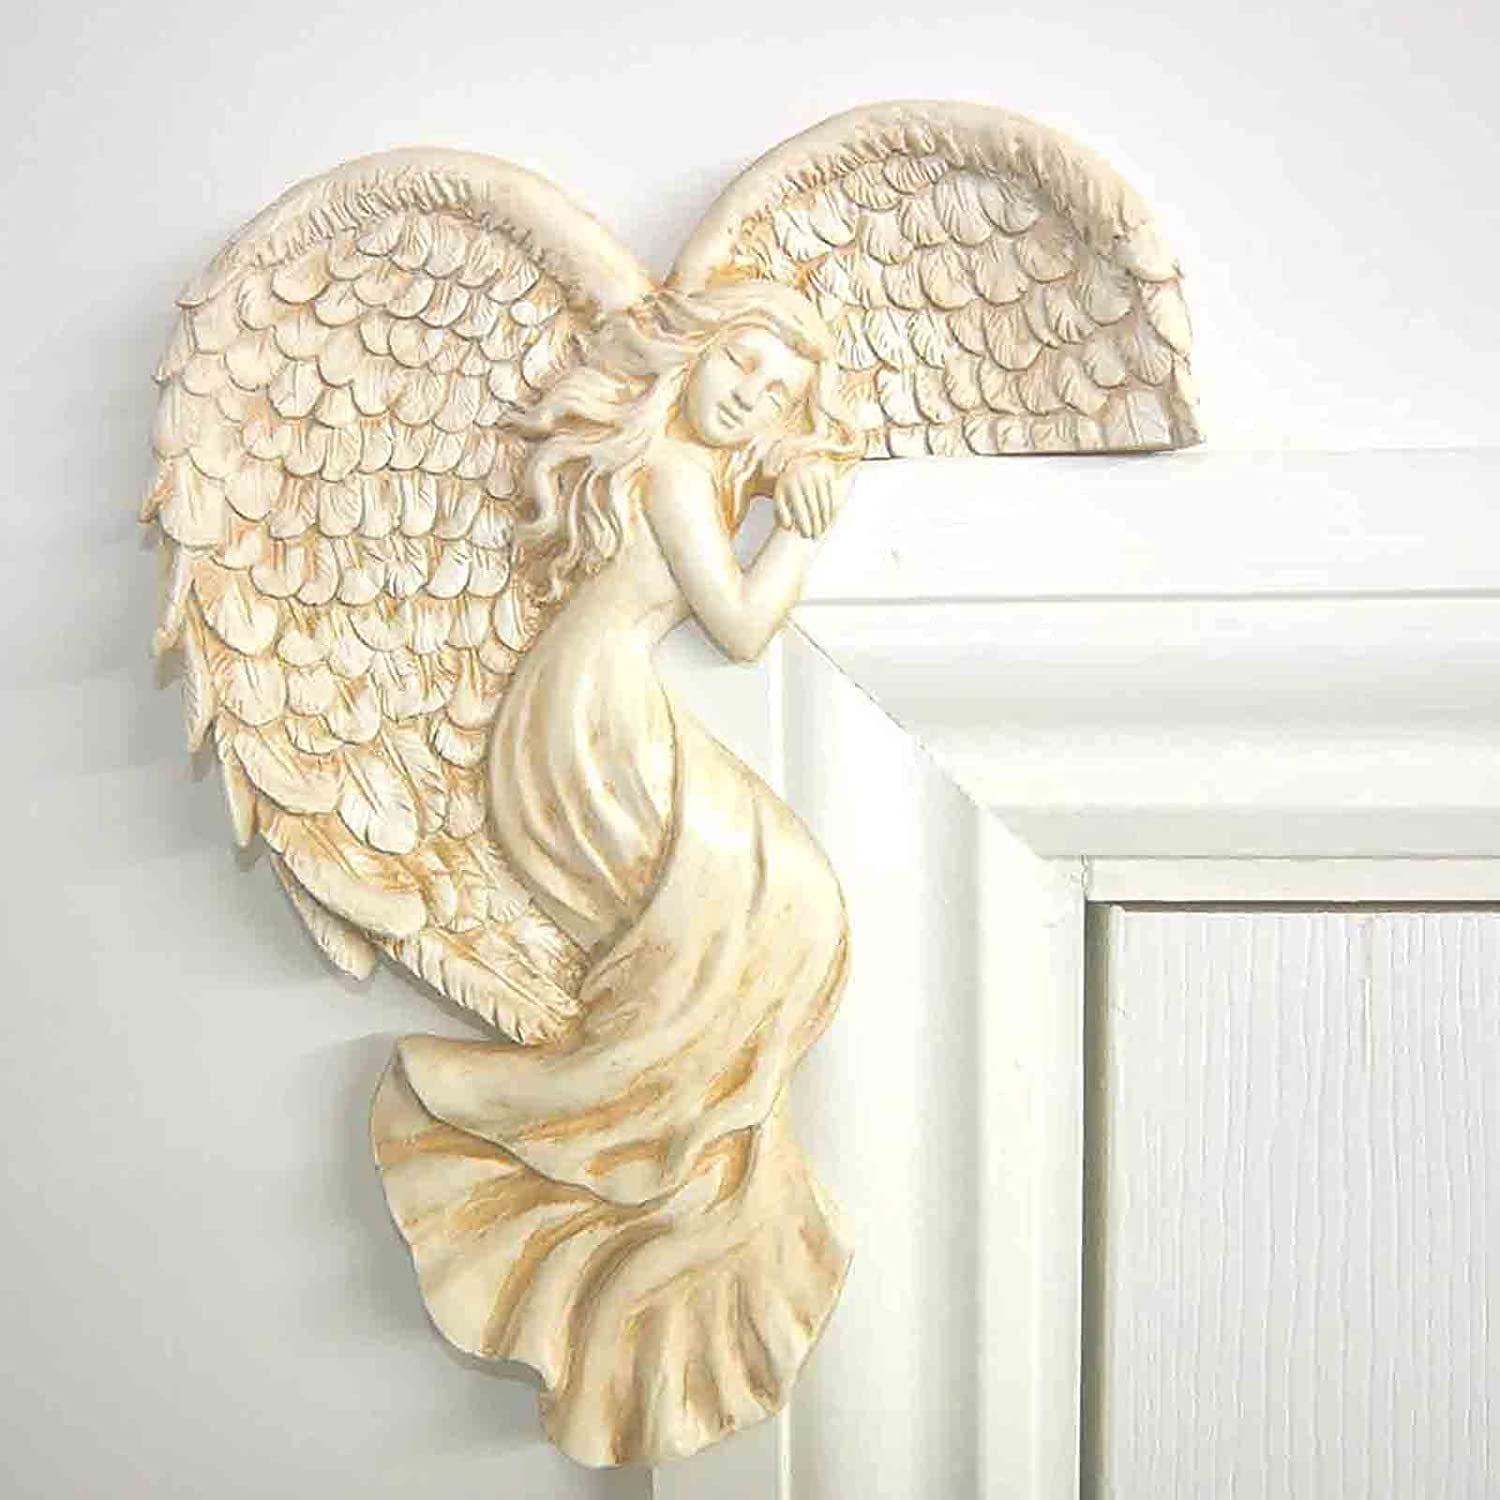 Angel Door Frame Ornaments Ivory Figure Wings Wall Art Home Decor Left and Right